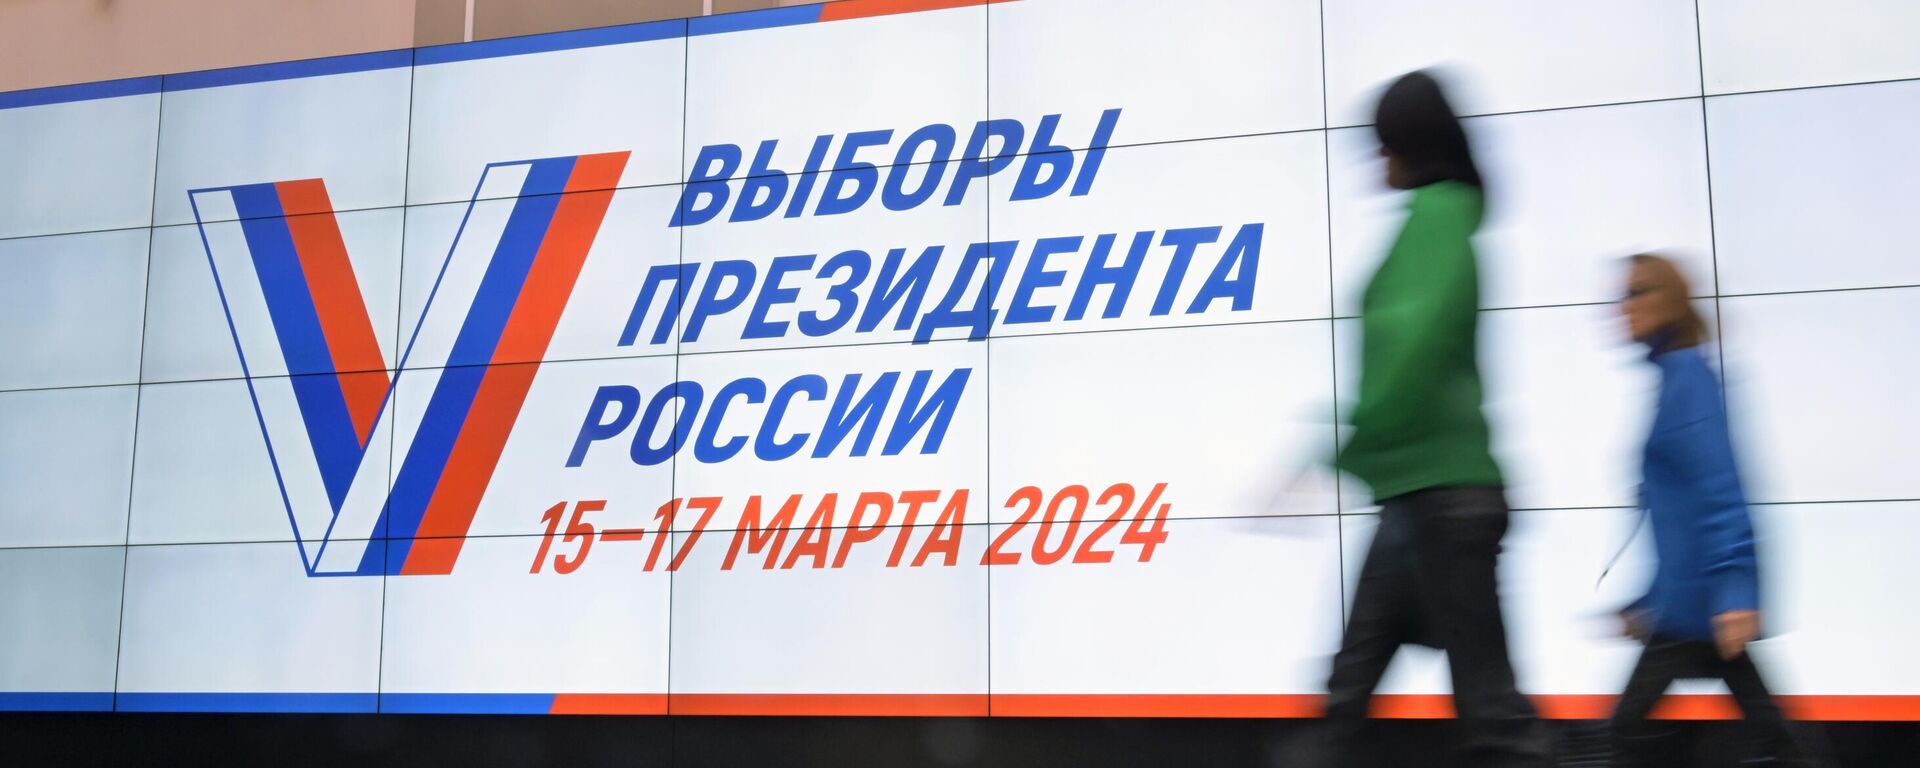 Russia is scheduled to hold its 2024 presidential election on March 15-17. - Sputnik भारत, 1920, 17.03.2024